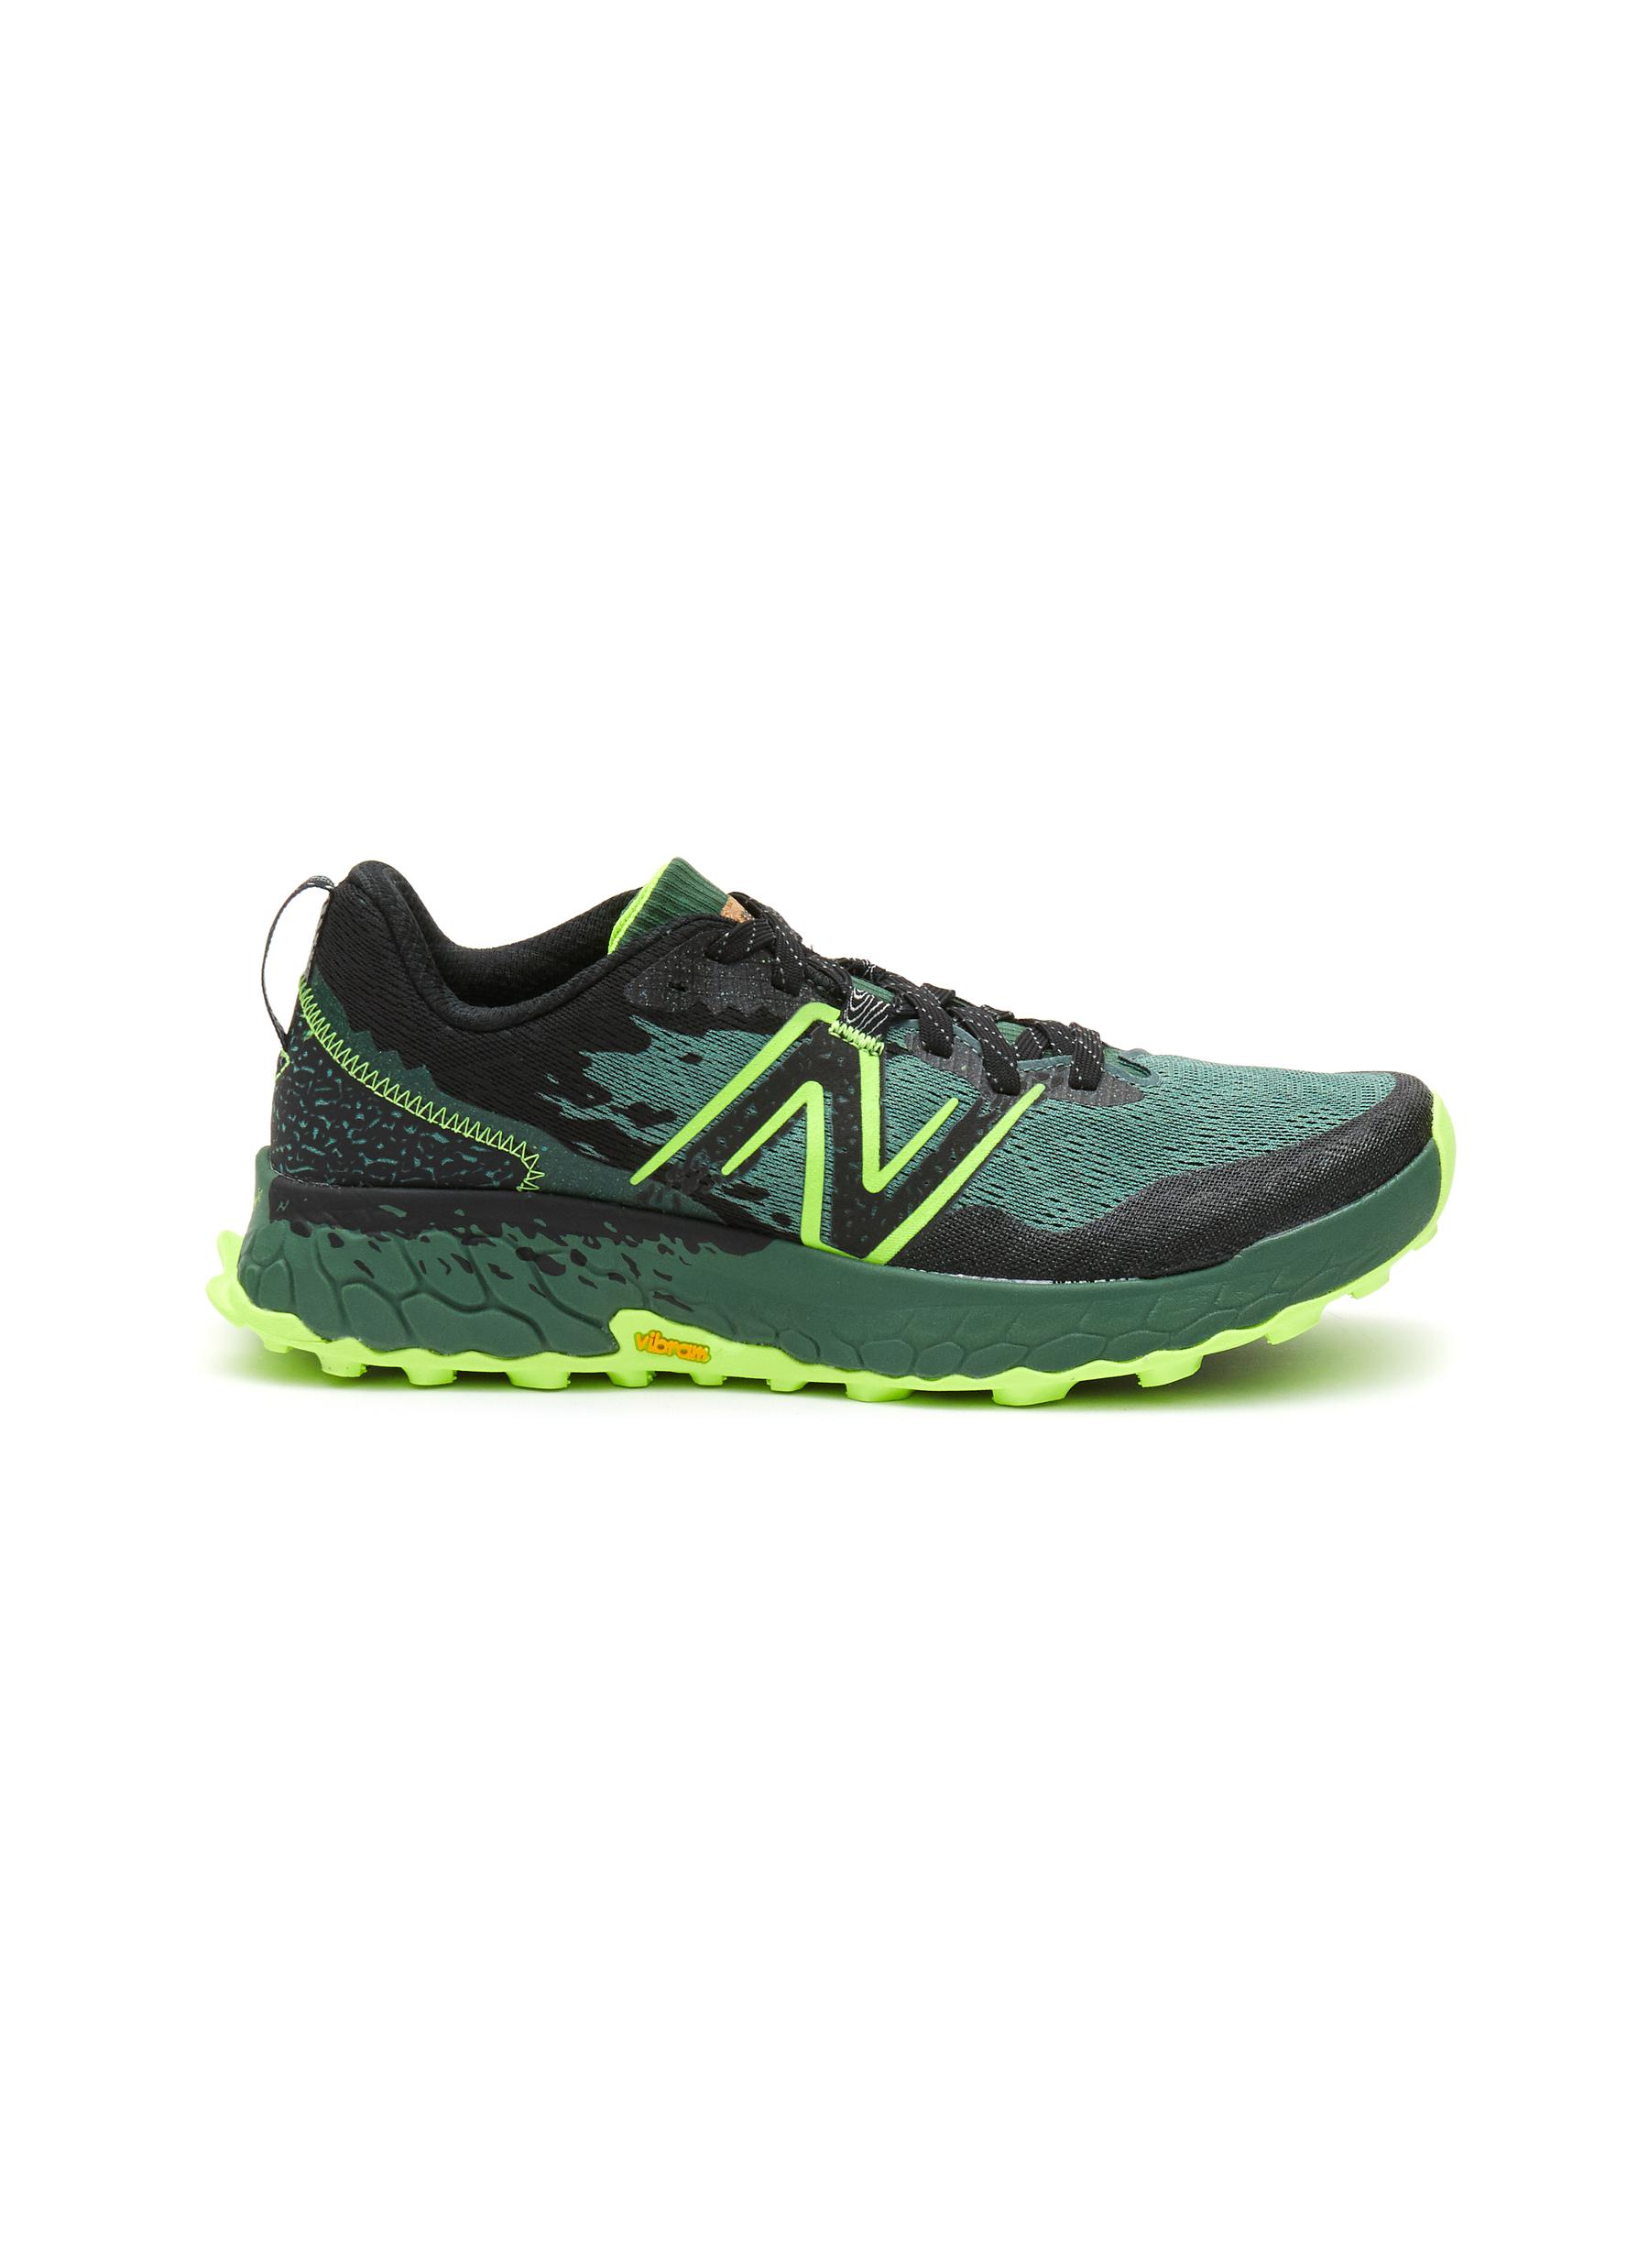 NEW BALANCE FRESH FOAM X HIERRO V7 LOW TOP LACE UP SNEAKERS